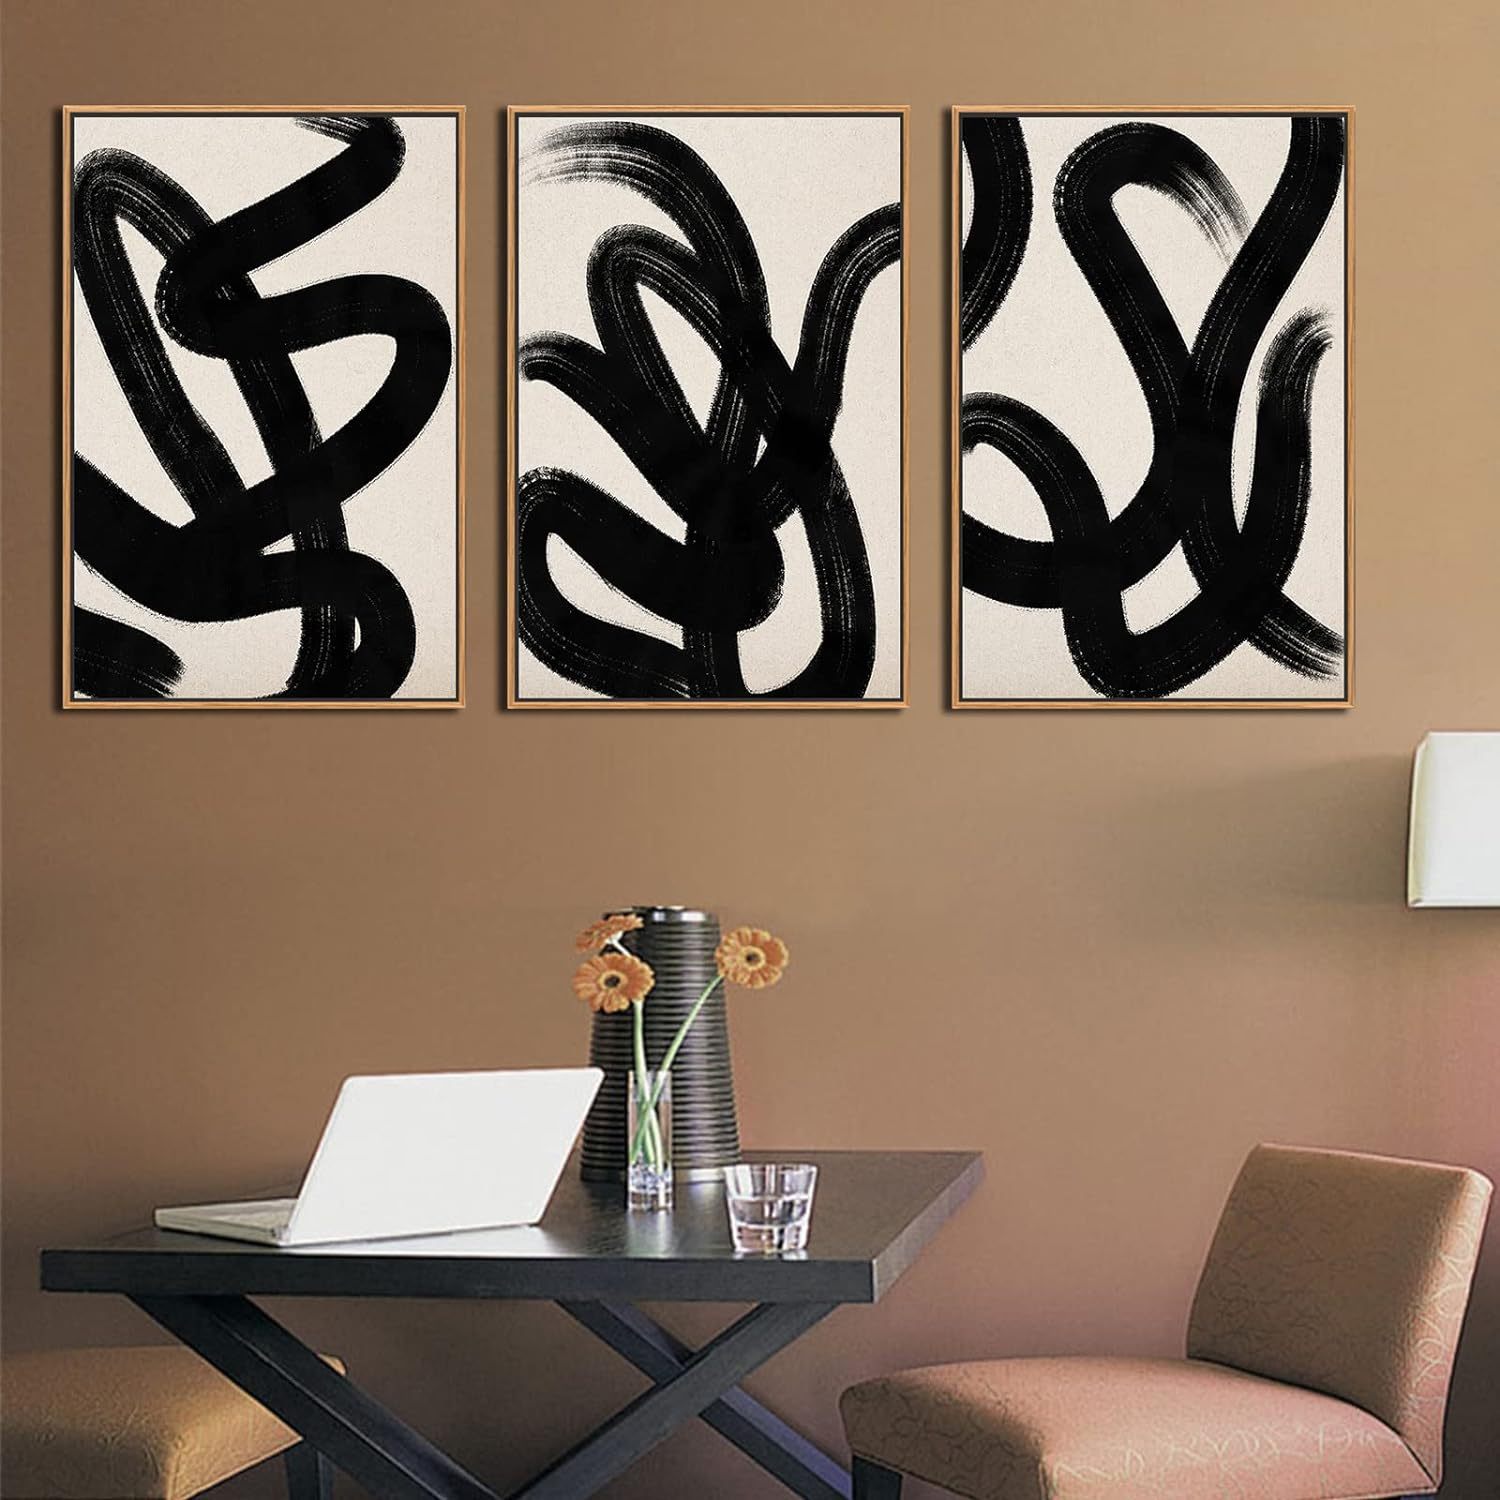 

Wall Art Canvas Set Abstract Lines Pictures Modern Mid Century Boho Wall Decor Minimalist Abstract Black Stroke Lines Canvas Painting Artwork Living Room Bedroom Home Office 16"x24"x3 Natural